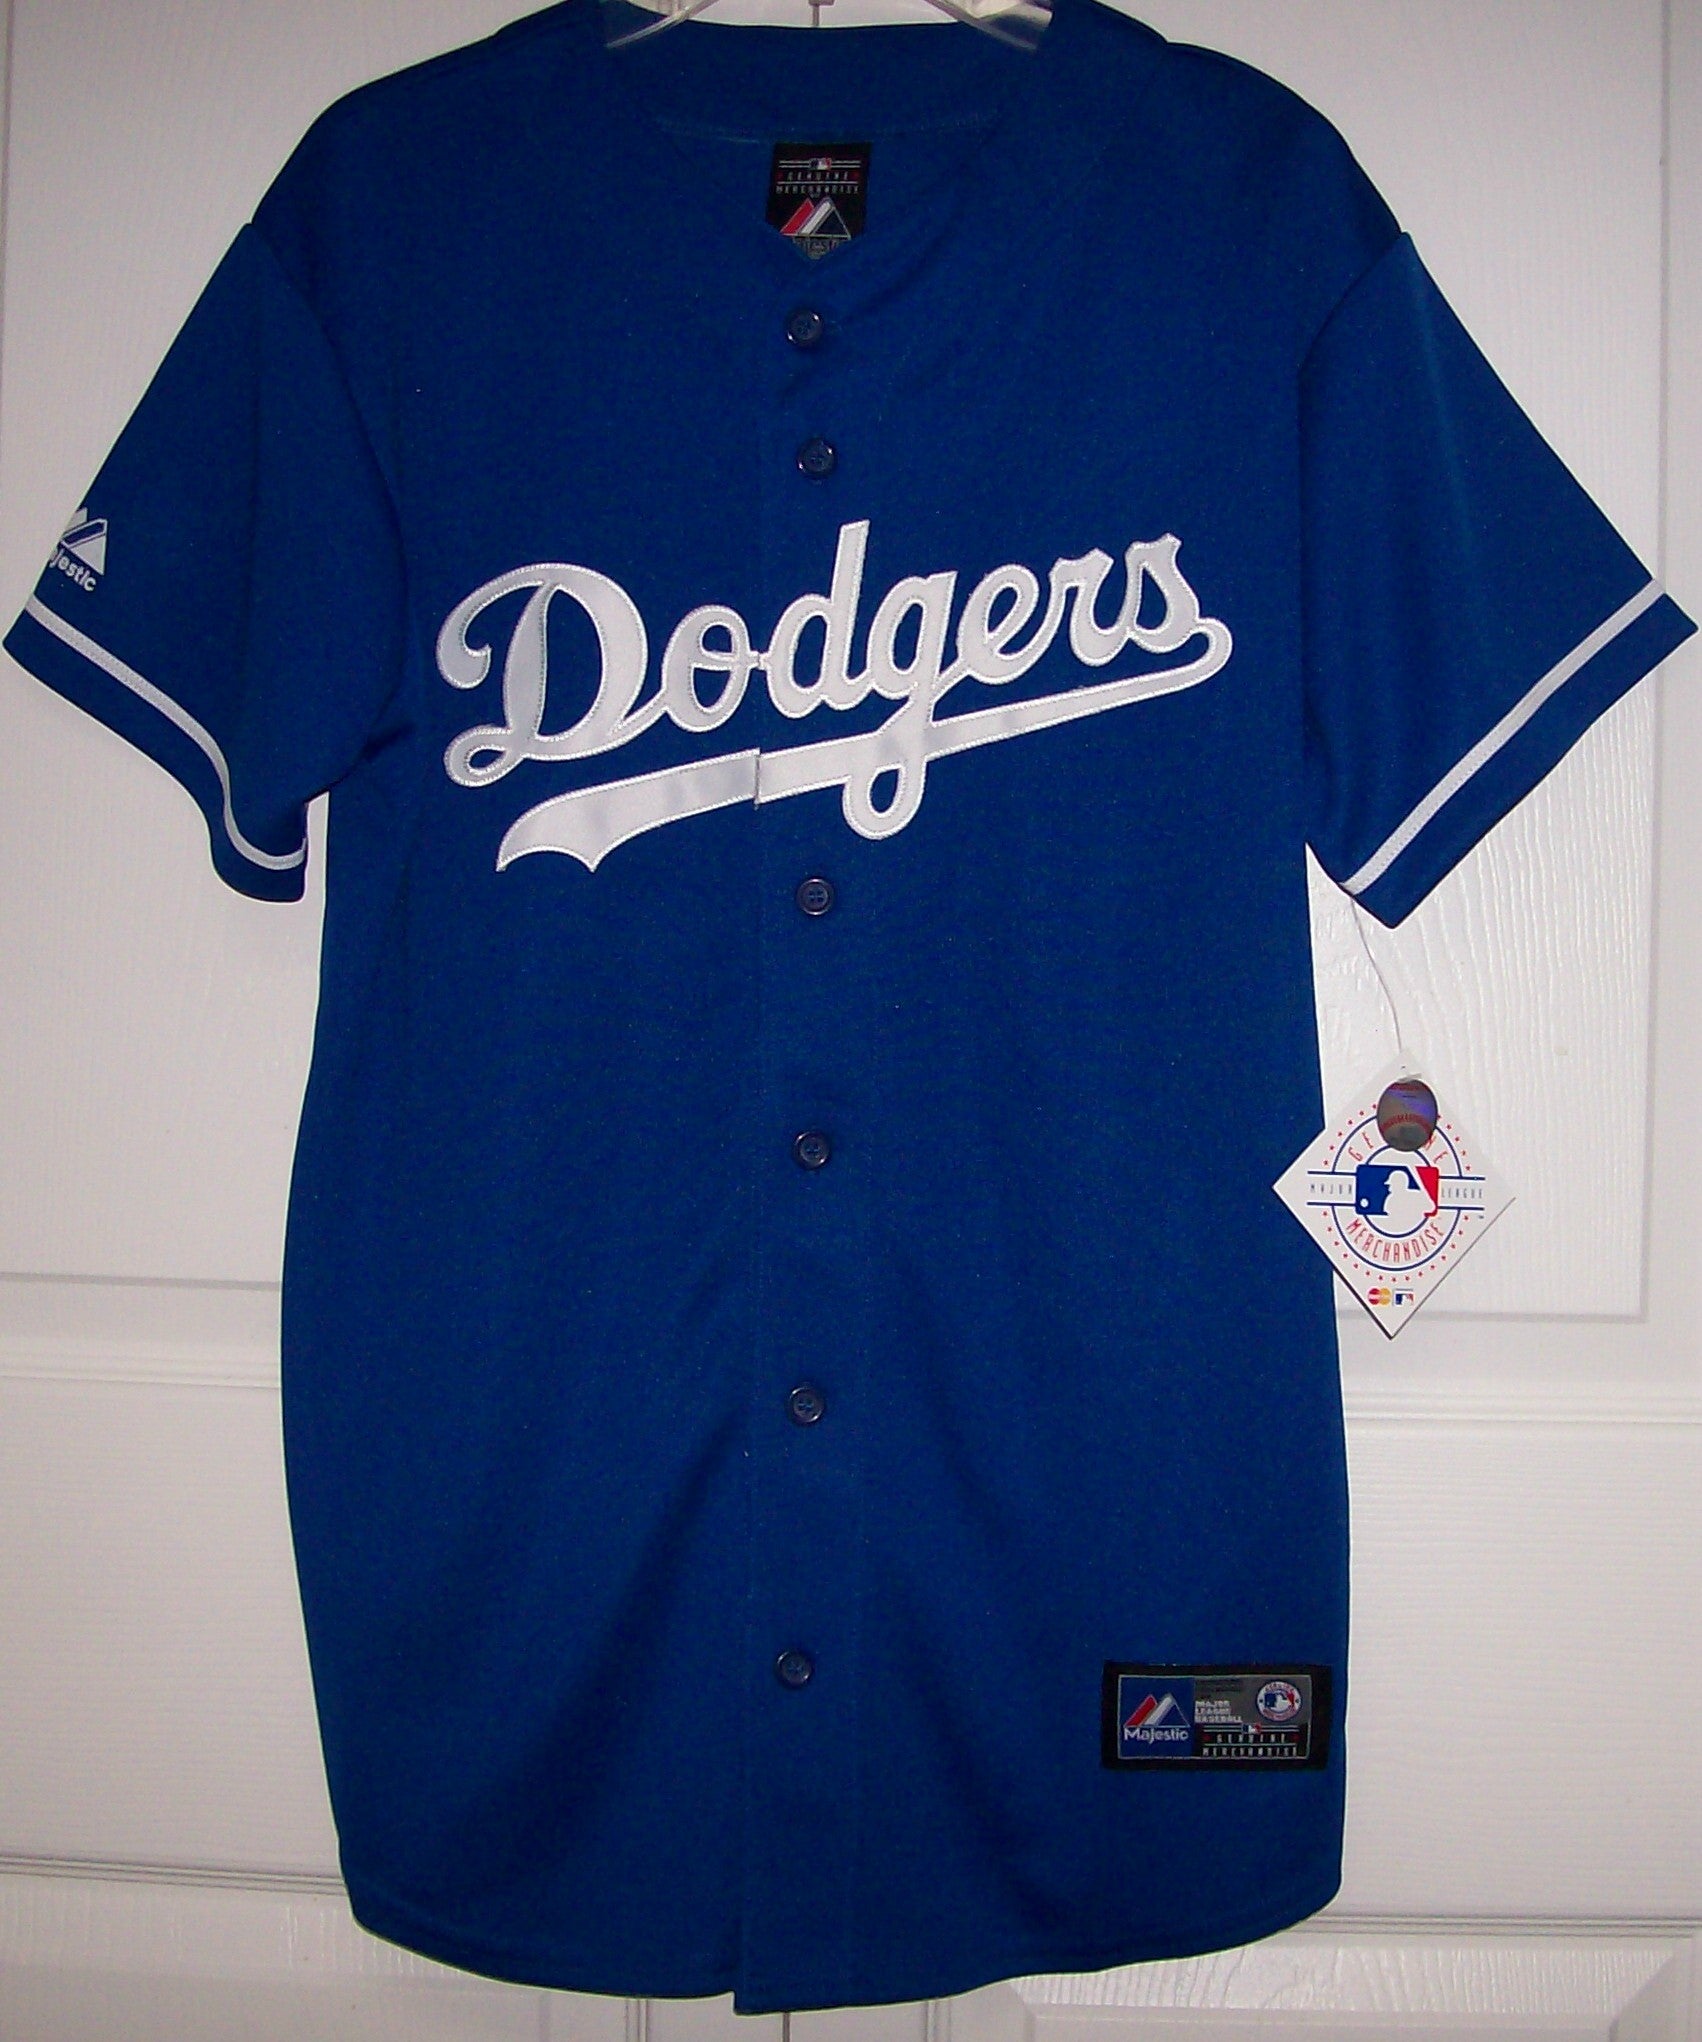 la dodgers mlb jersey buying guide